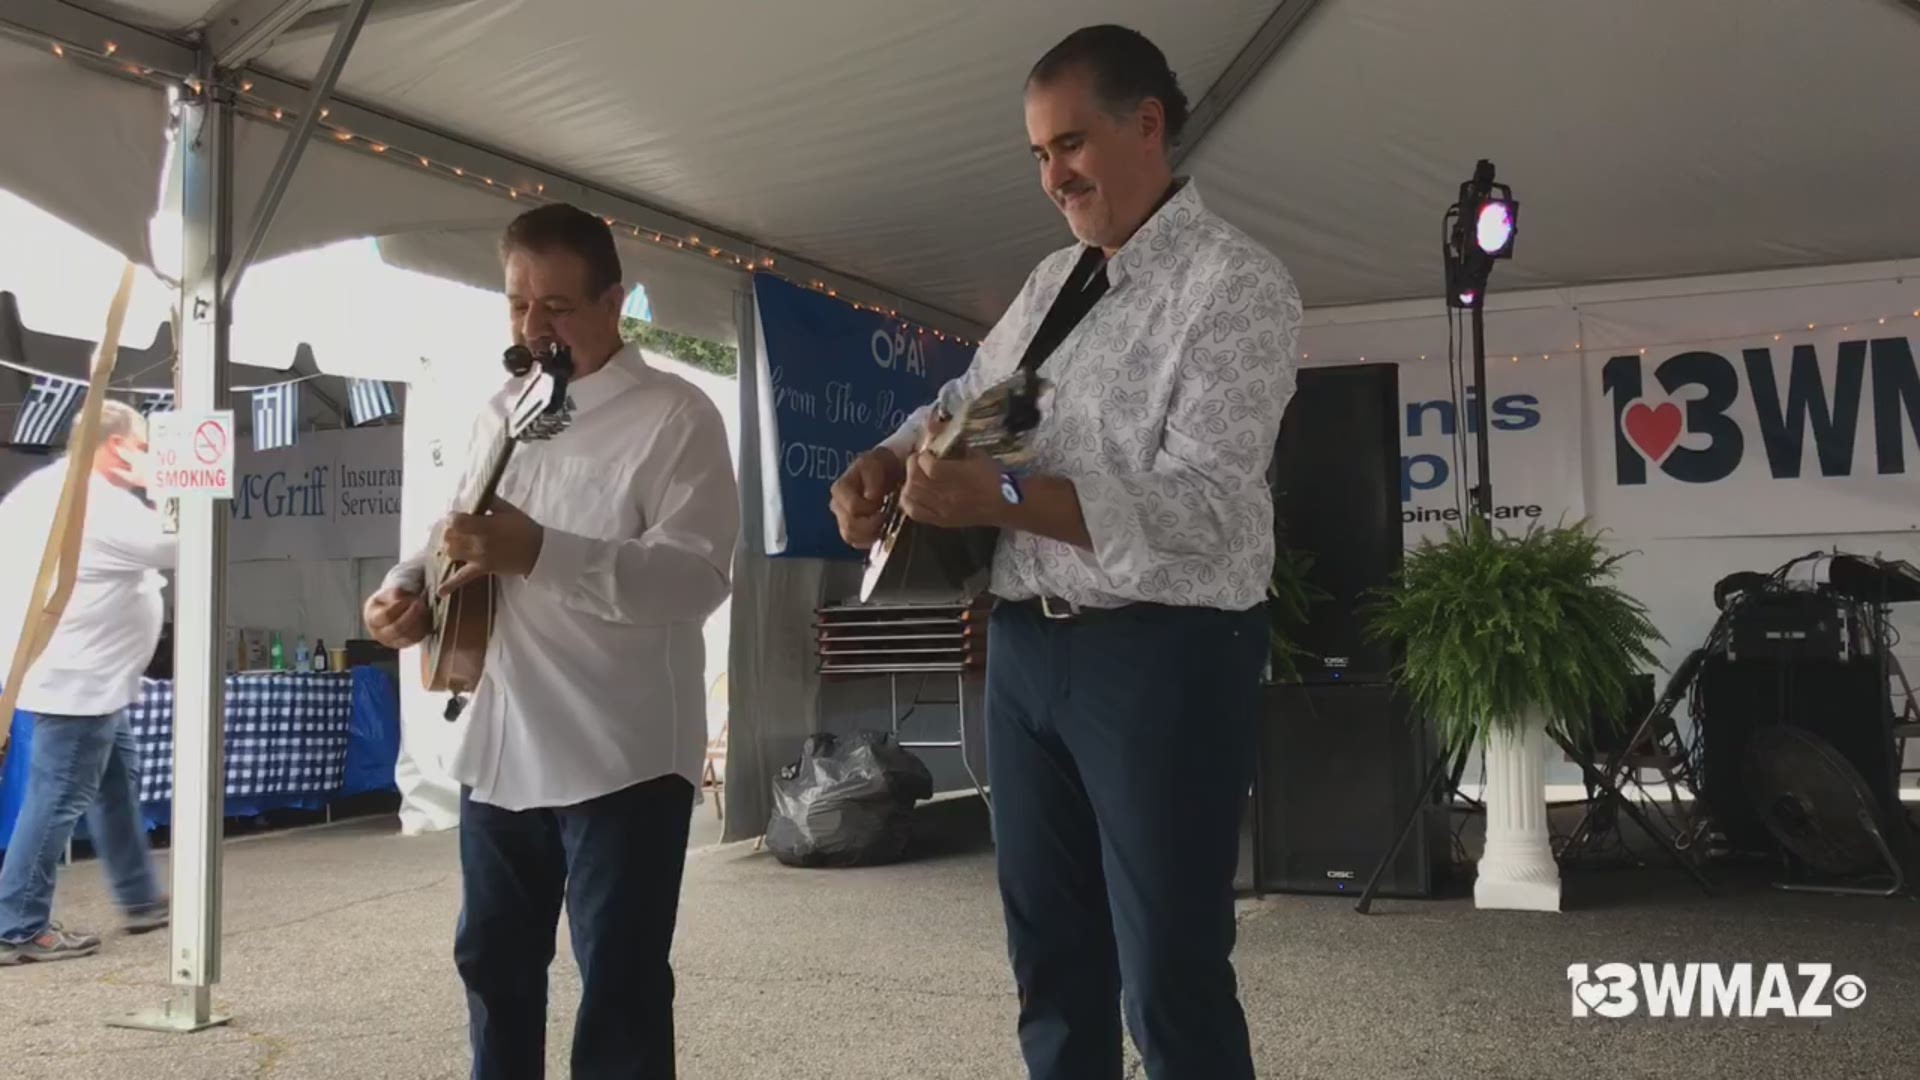 The Greek Festival takes place this weekend at Holy Cross Greek Orthodox Church in Macon.